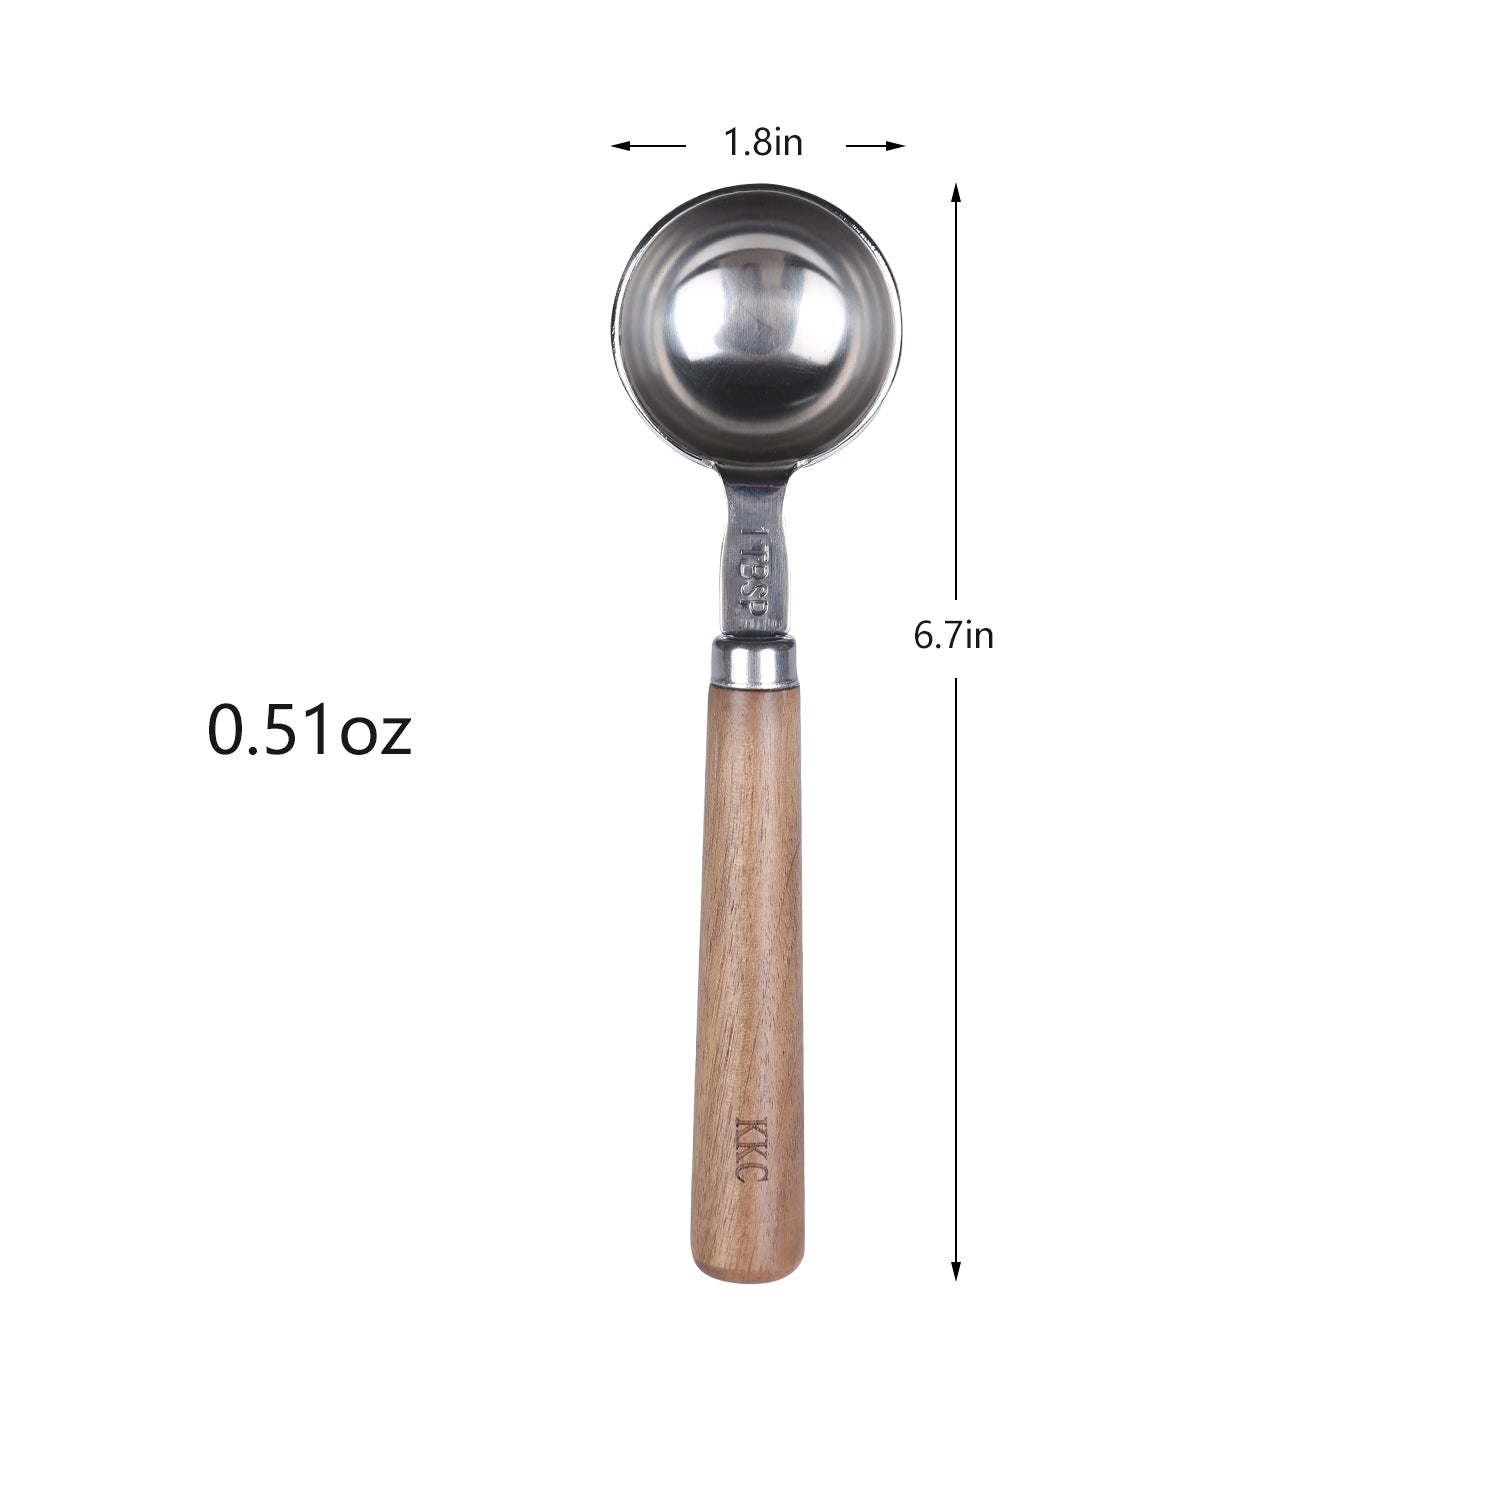 Rattleware Kilo Bean Scale Coffee Scoop For Counter And Case Display -  Multifunctional Scale Scoop - Flat Design With Funnel - High-Density  Plastic